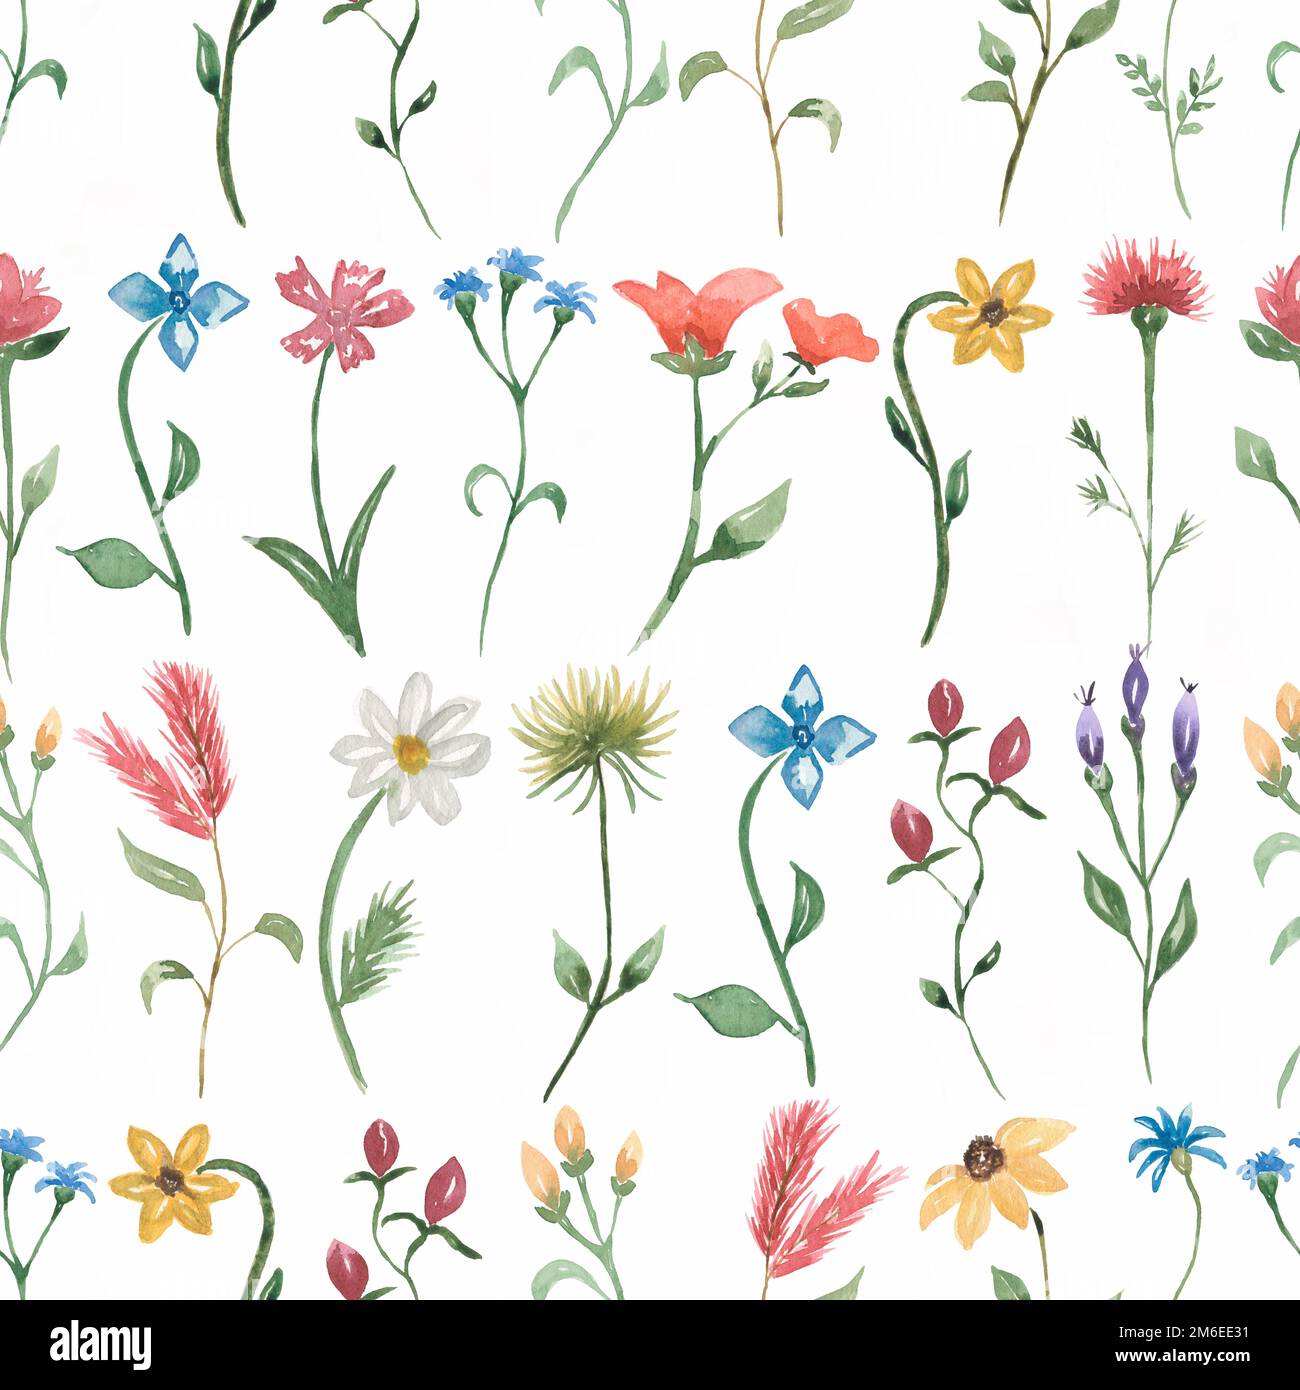 Wildflower Garden Wallpaper For Android Background, Pictures Of Wildflowers  Background Image And Wallpaper for Free Download